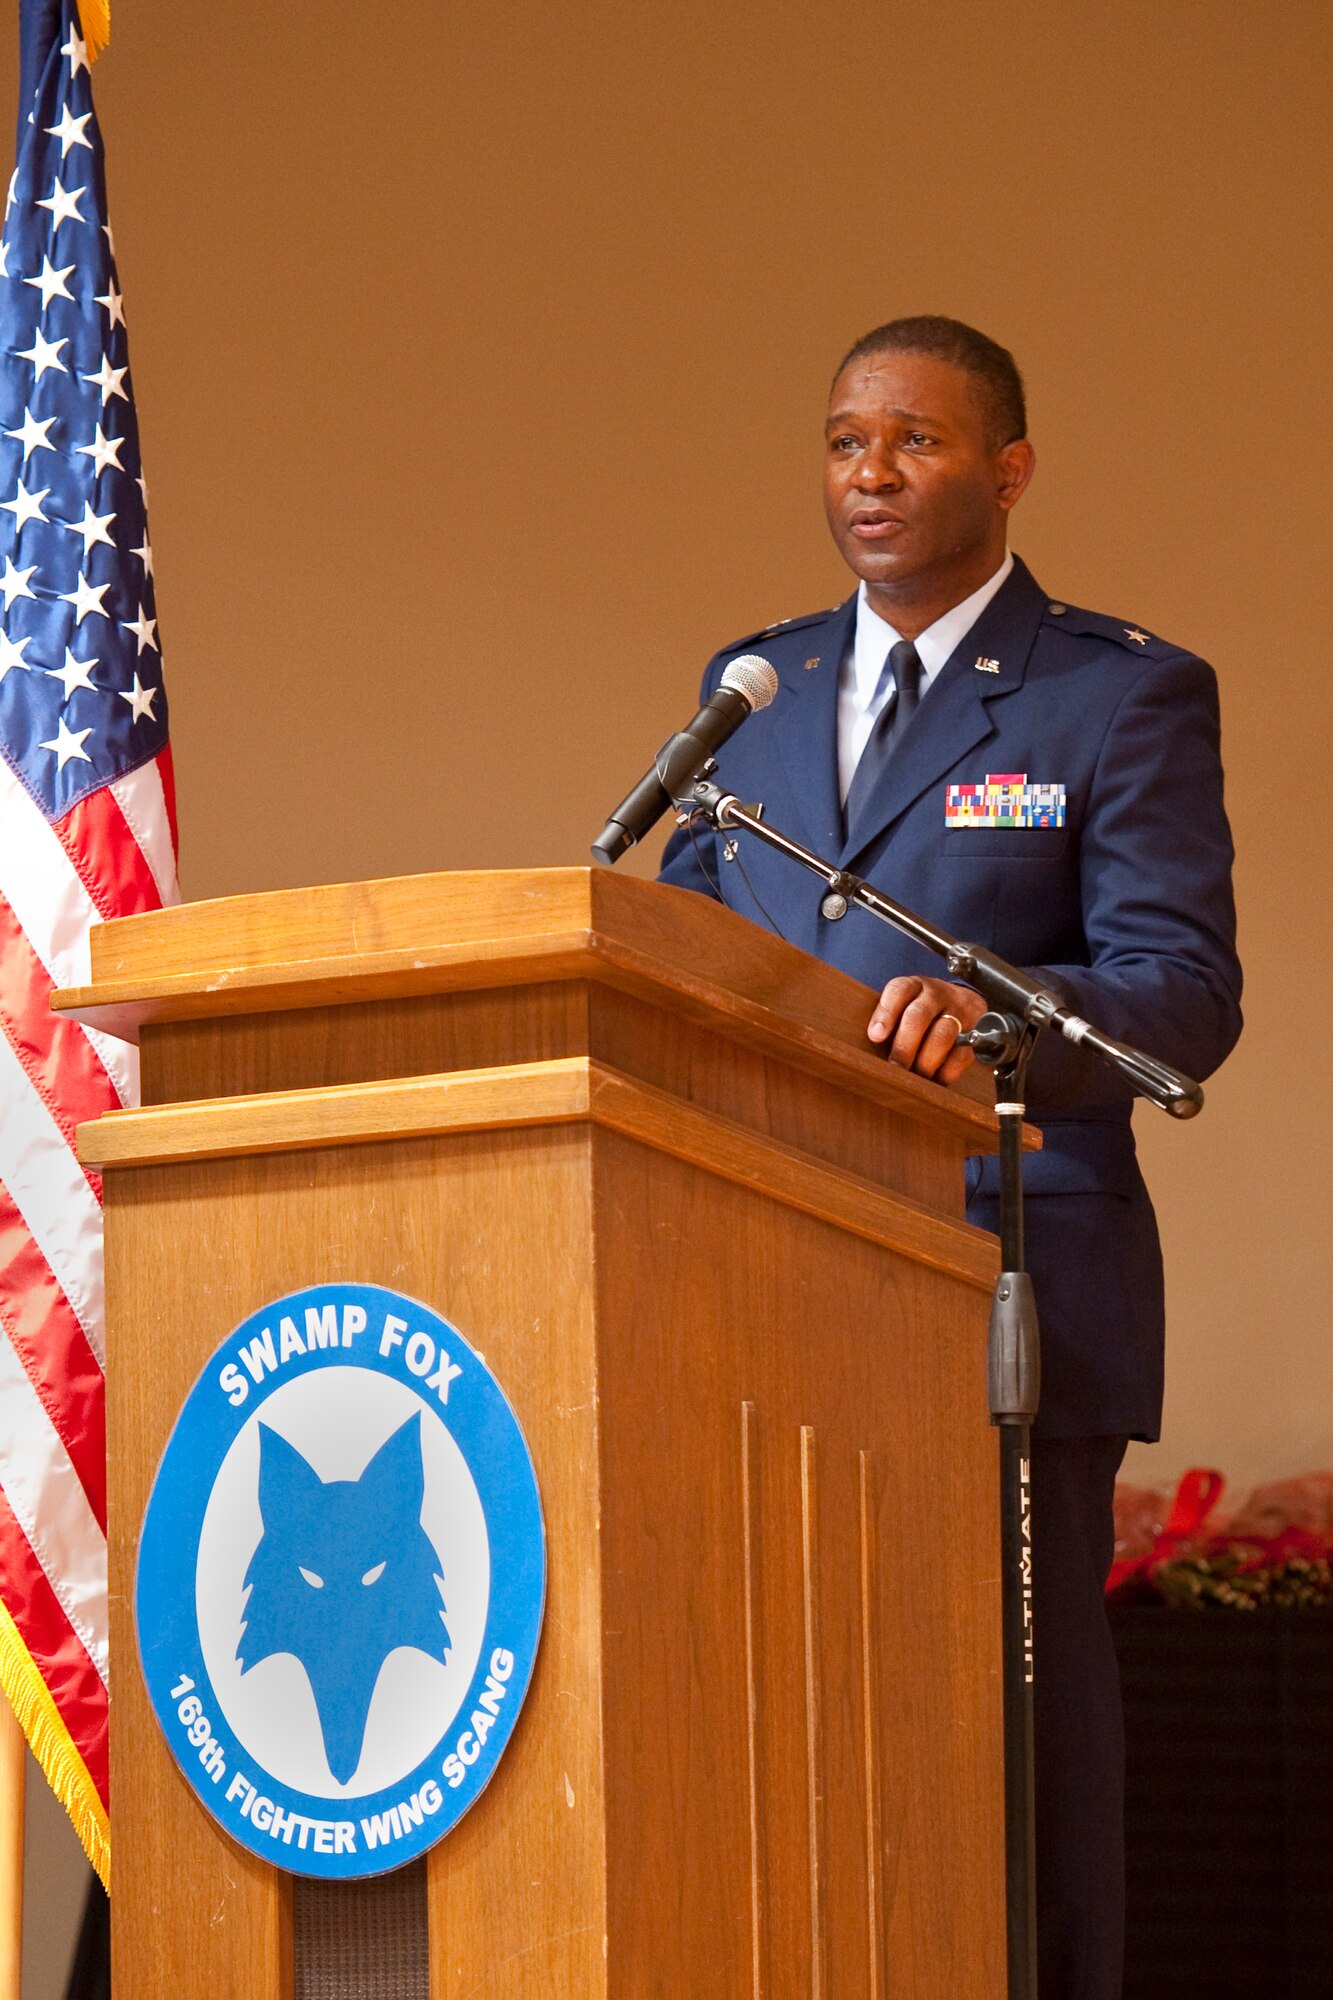 Newly promoted Brig. Gen. Calvin H. Elam makes his remarks during a ceremony at McEntire Joint National Guard Base on January 13, 2013. Elam becomes the South Carolina Air National Guard's first black general officer. Elam has served as the Assistant Adjutant General for Air for the South Carolina National Guard since January 2012. As a civilian, he is Chief Executive Officer for Elam Financial Group. (National Guard photo by Staff Sgt. Jorge Intriago/Released)